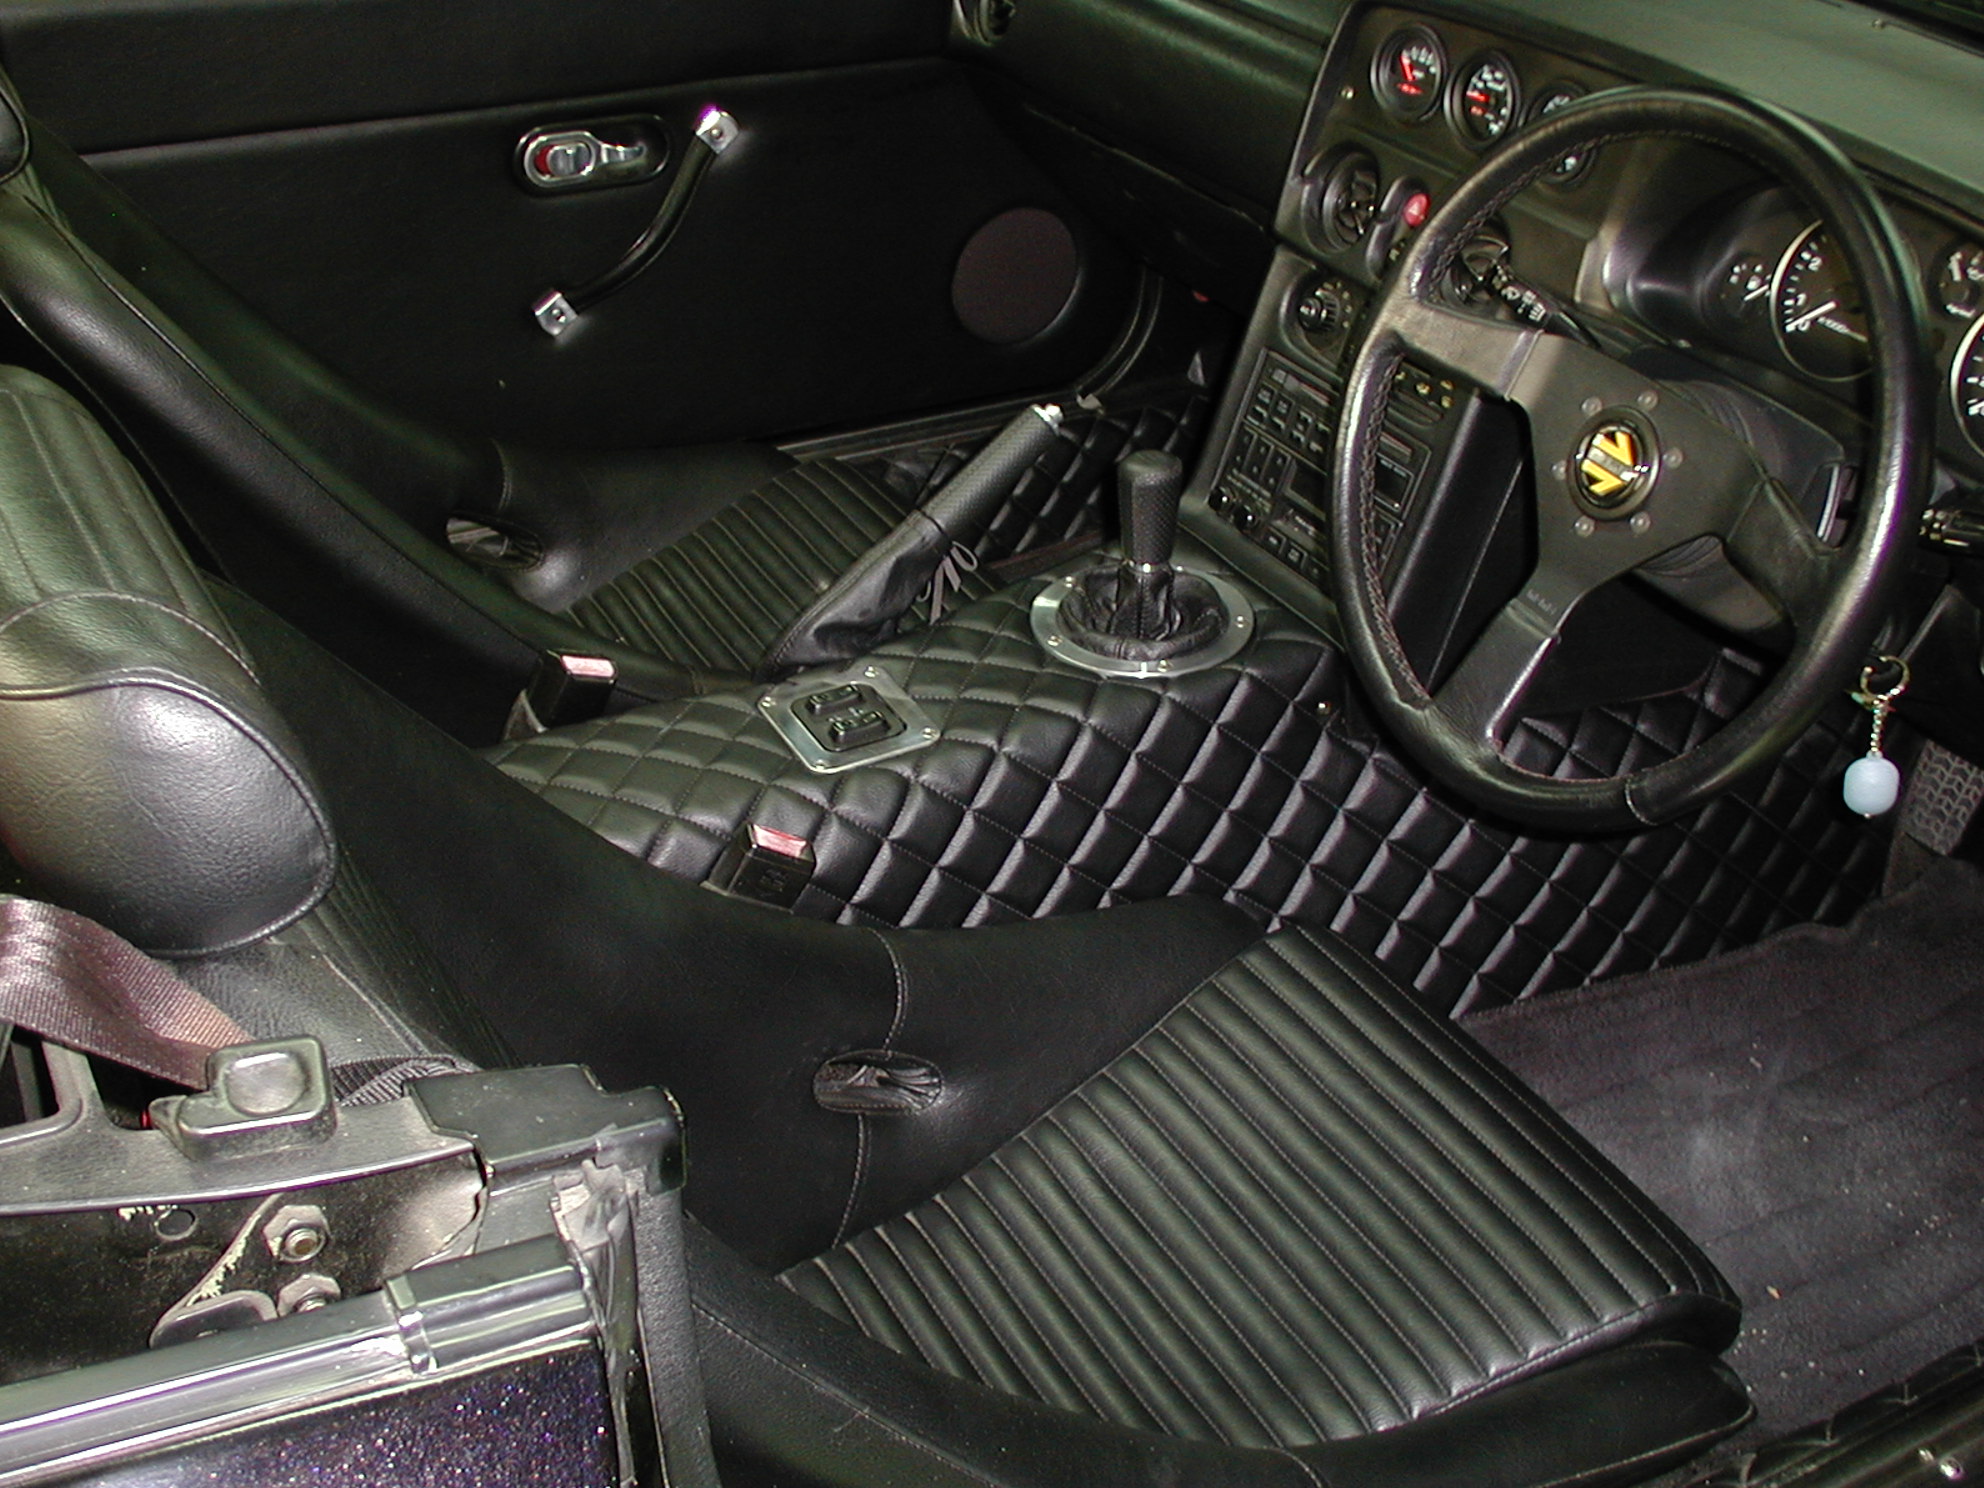 Nakamae Quilted Center Console For Power Windows For Mx5